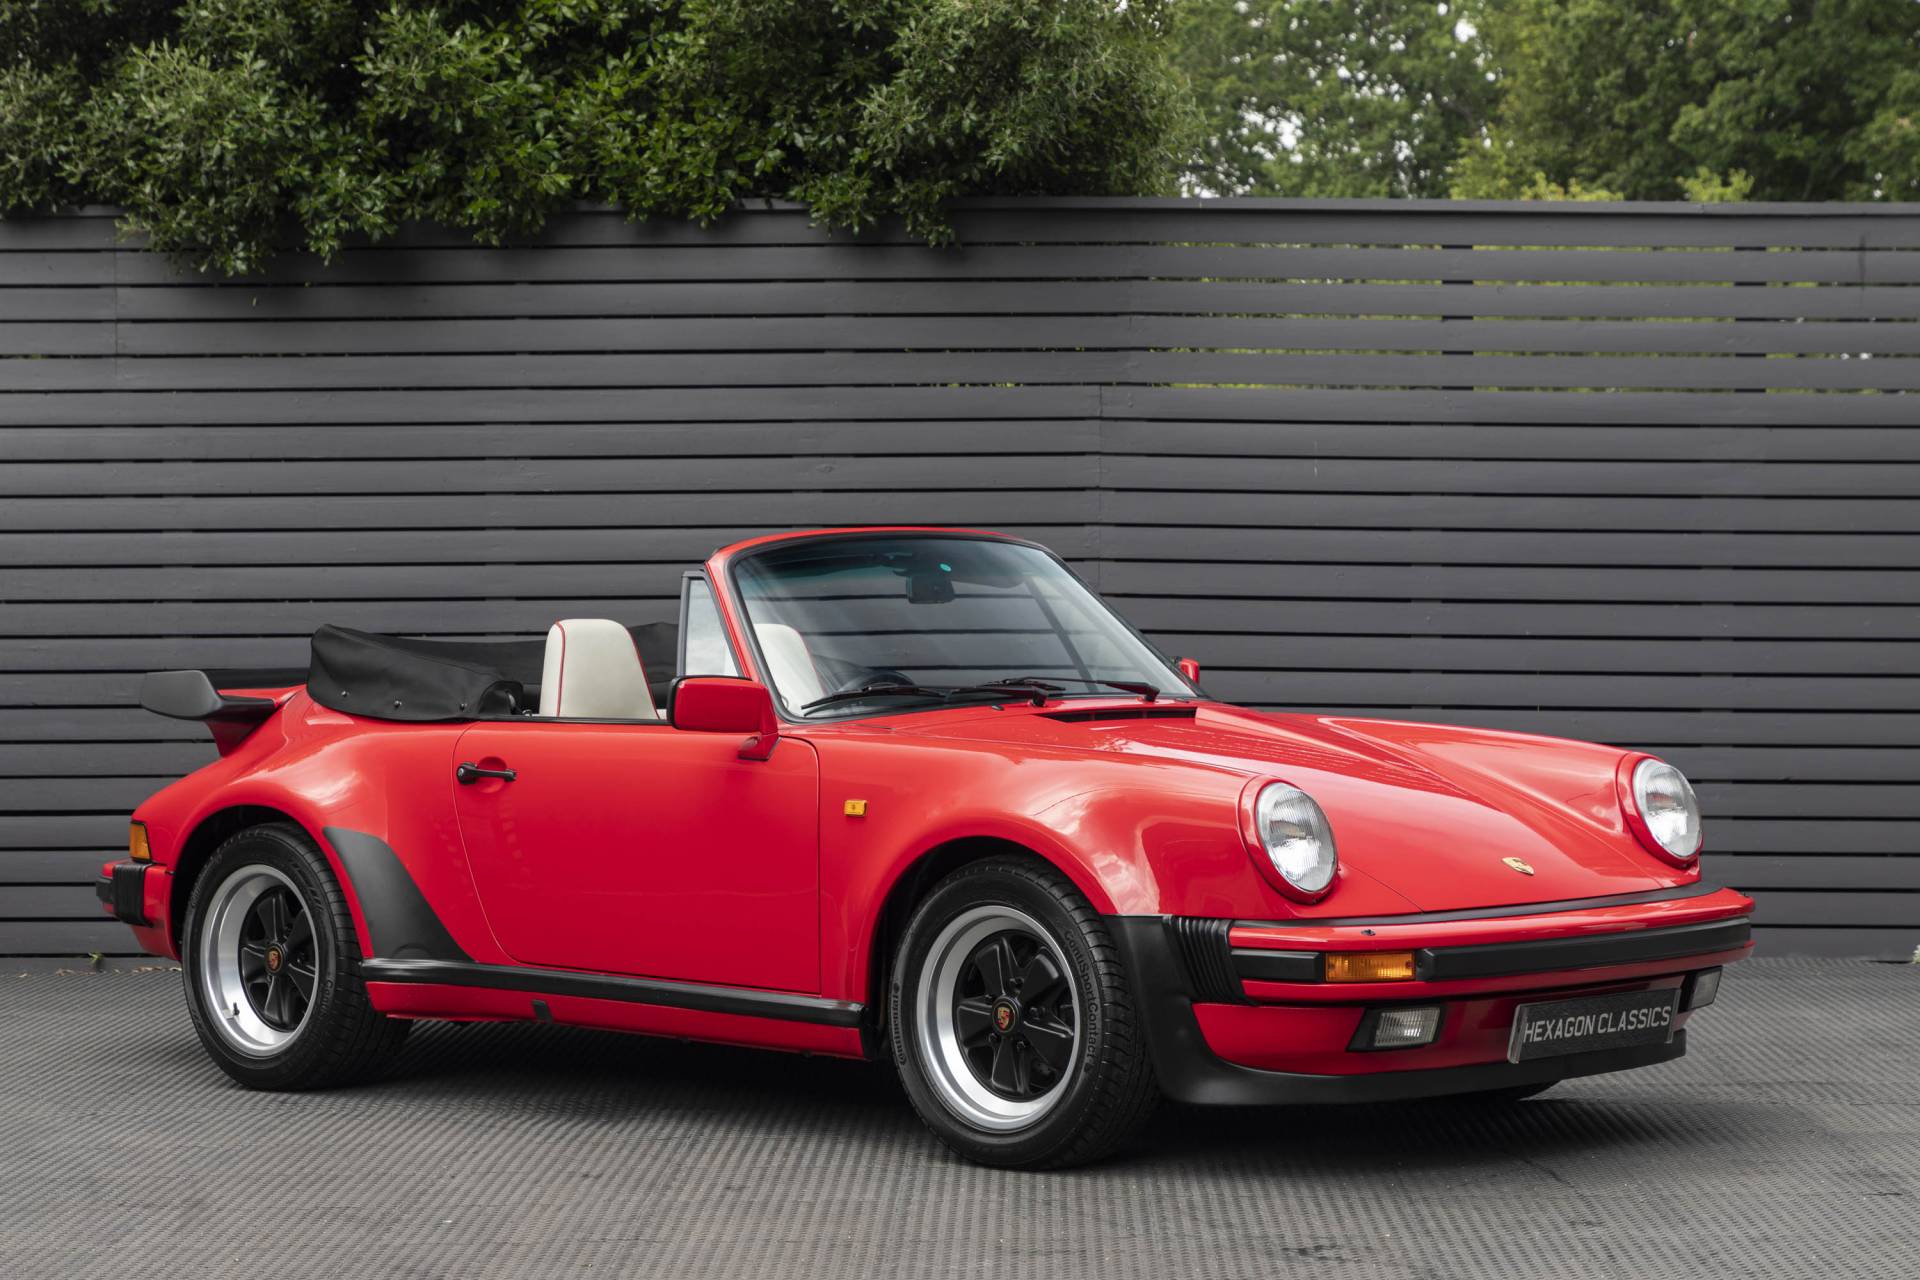 For Sale: Porsche 911 Carrera  (WTL) (1989) offered for GBP 94,995